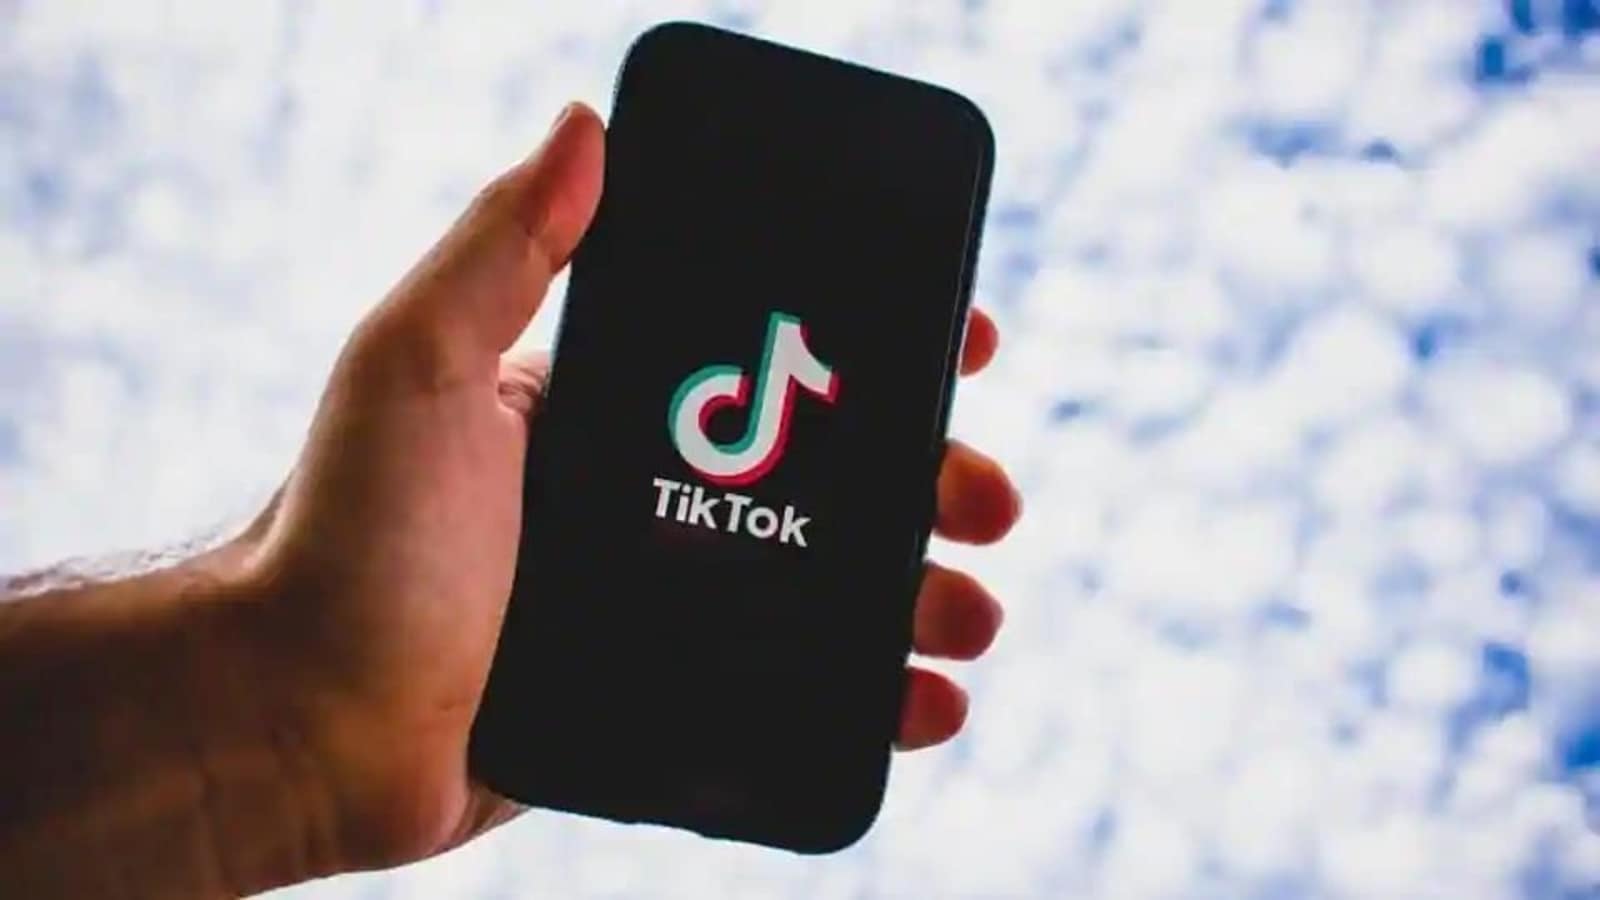 Xi Jinping's China could force TikTok to share American users' data, claims US senator: Report